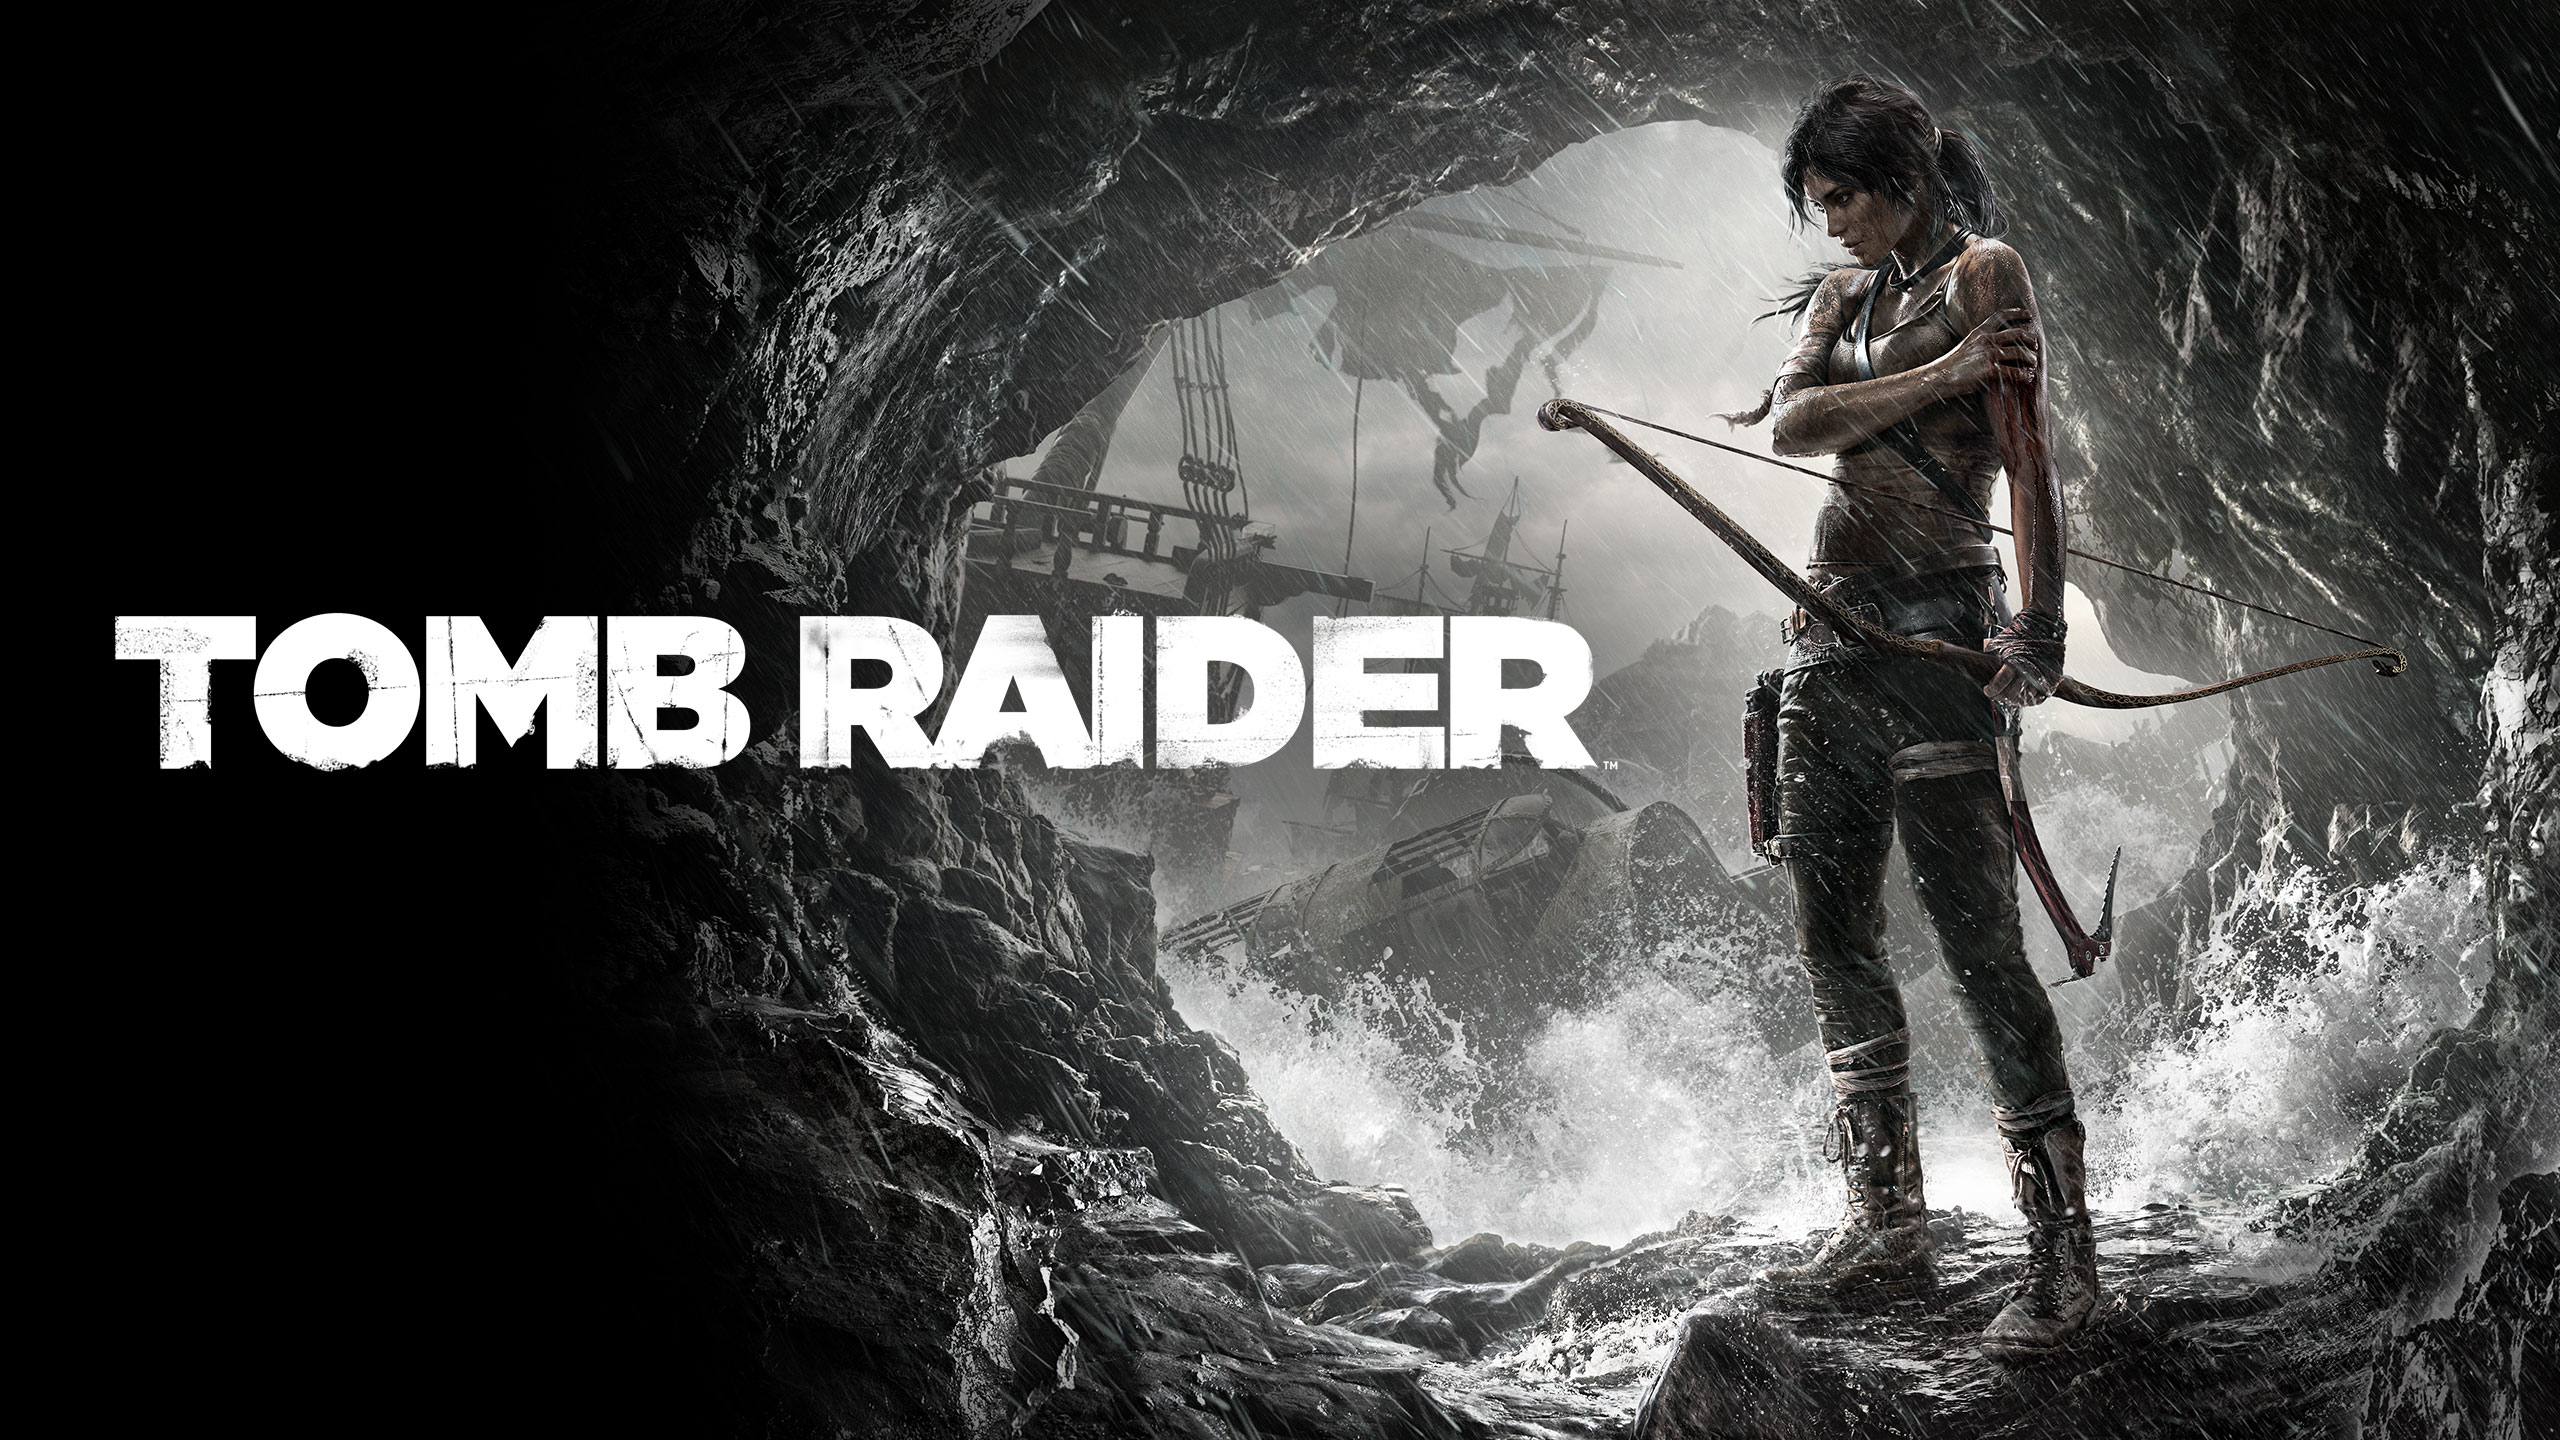 Tomb Raider Movie and Series Coming To Amazon Prime Signals MCU Scale Ambitions For Adventure Franchise Reboot